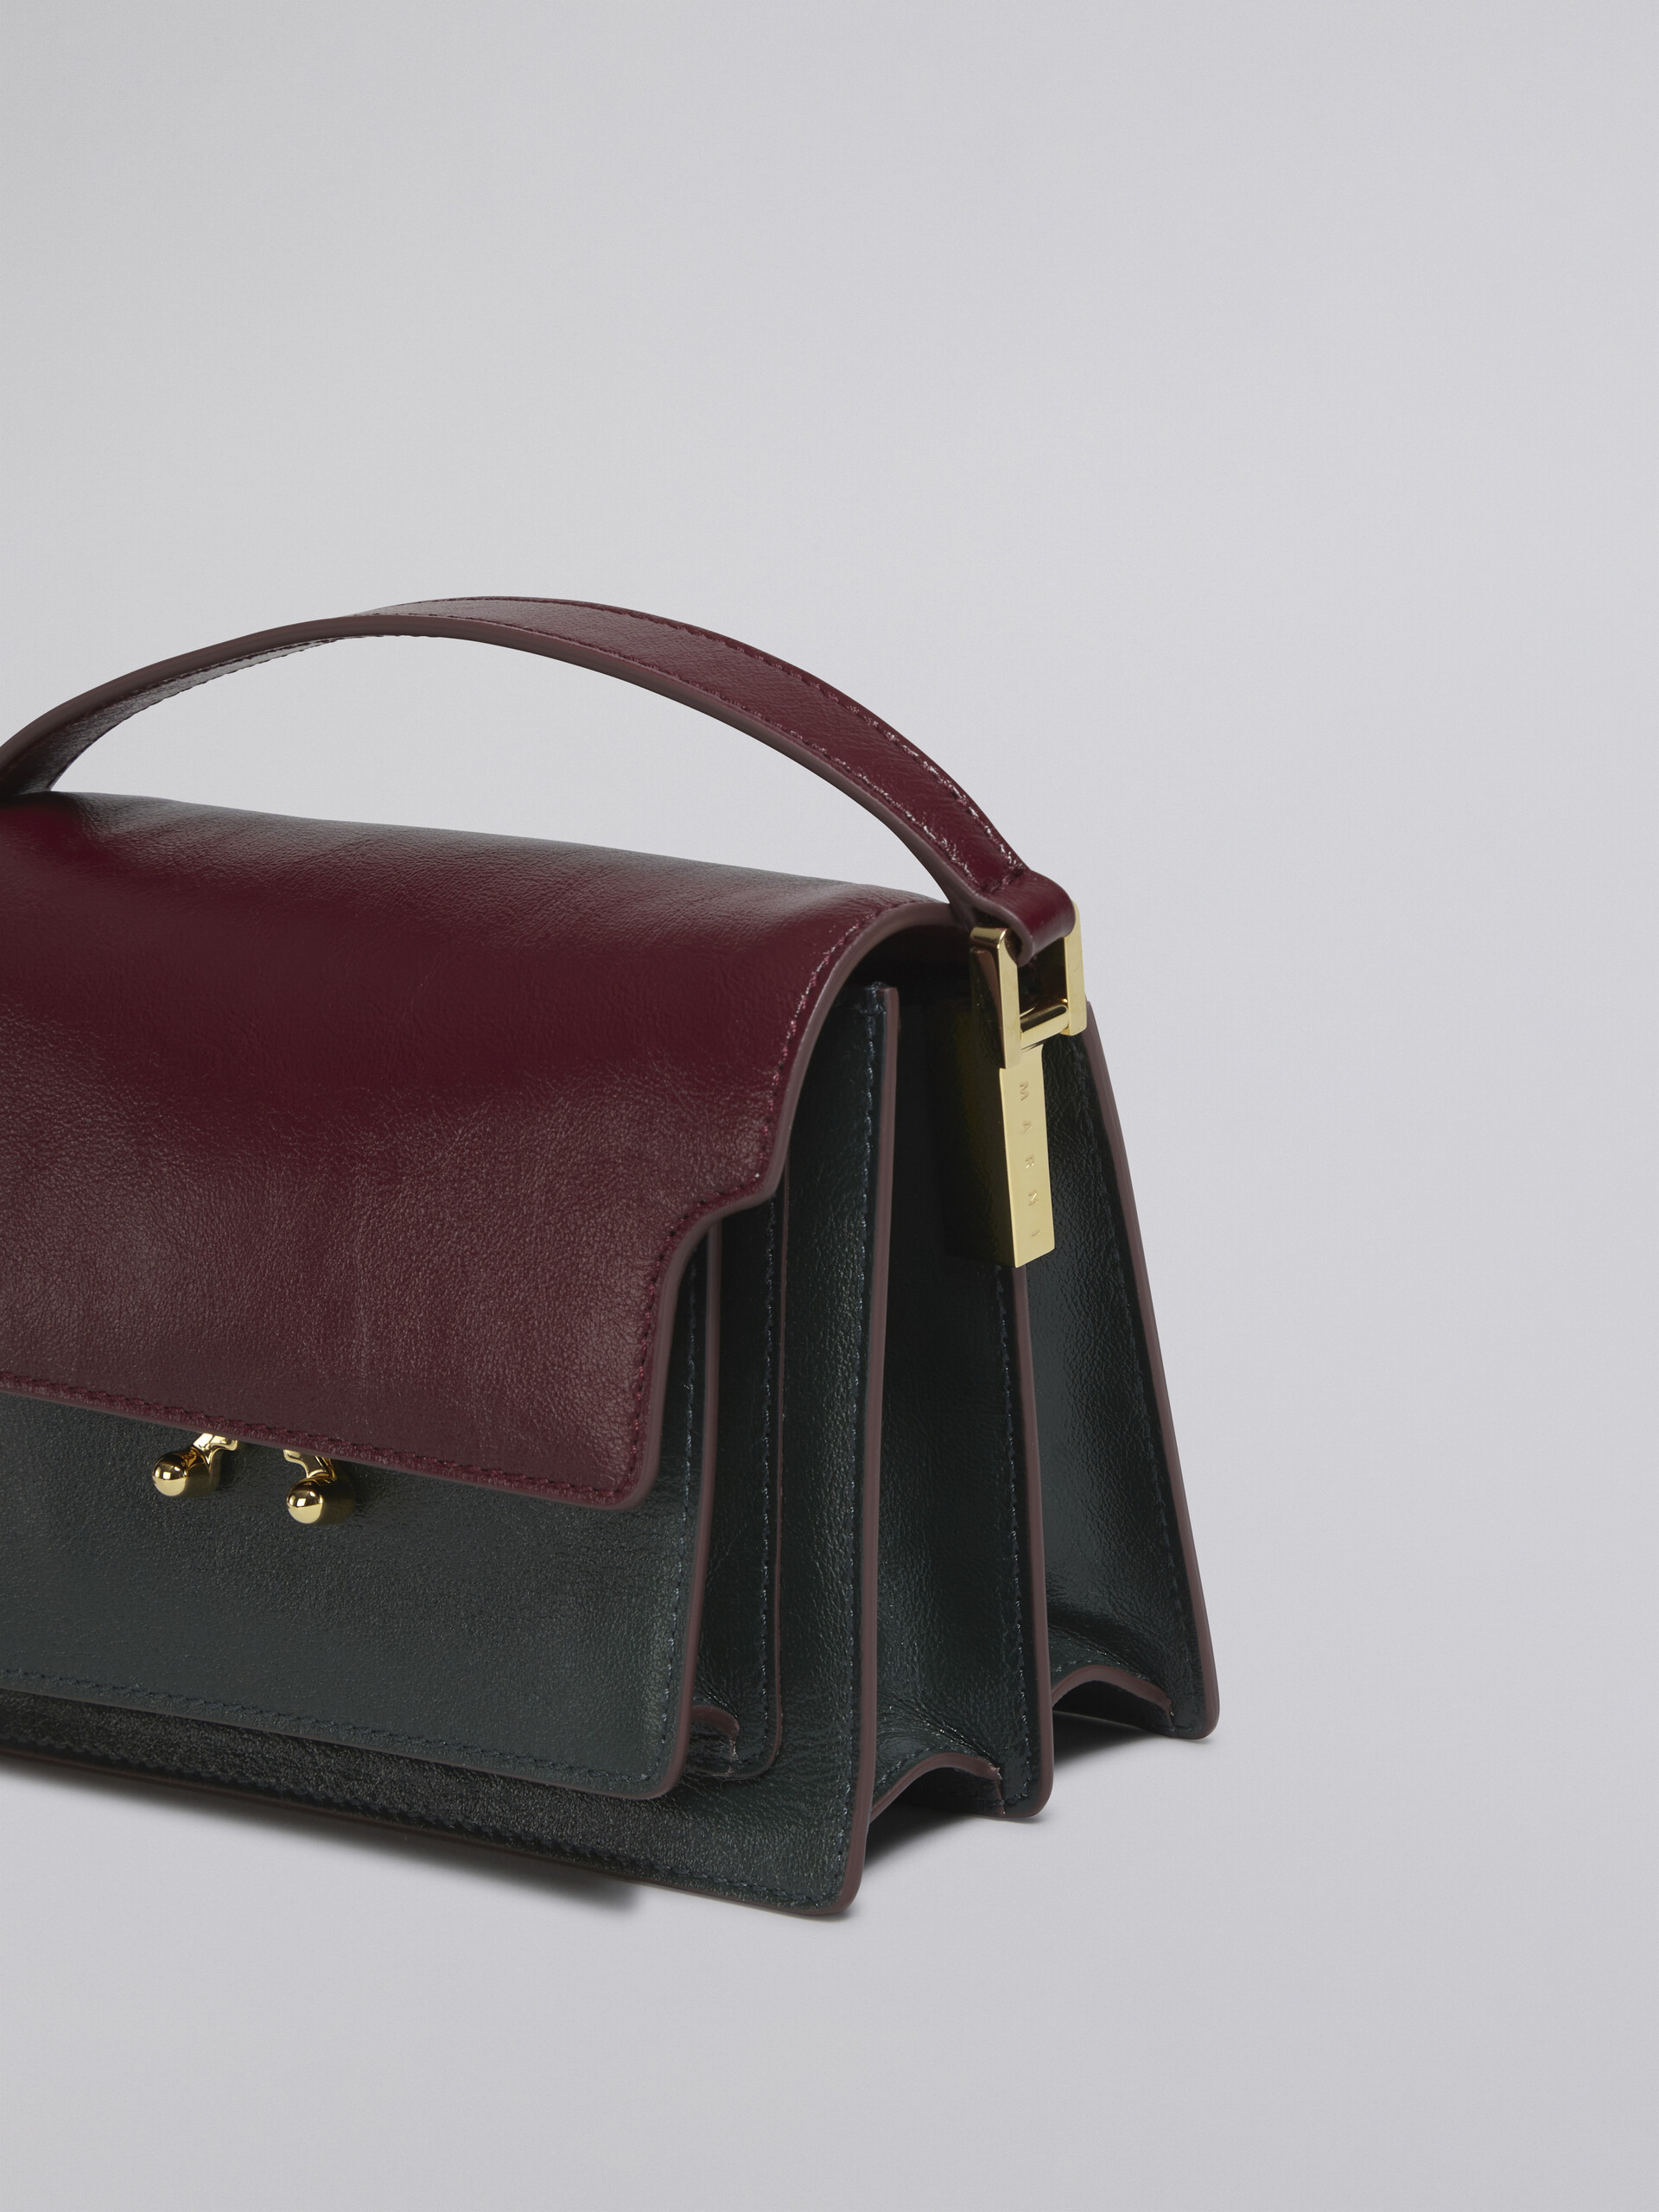 TRUNK SOFT mini bag in green and burgundy leather - Shoulder Bags - Image 4